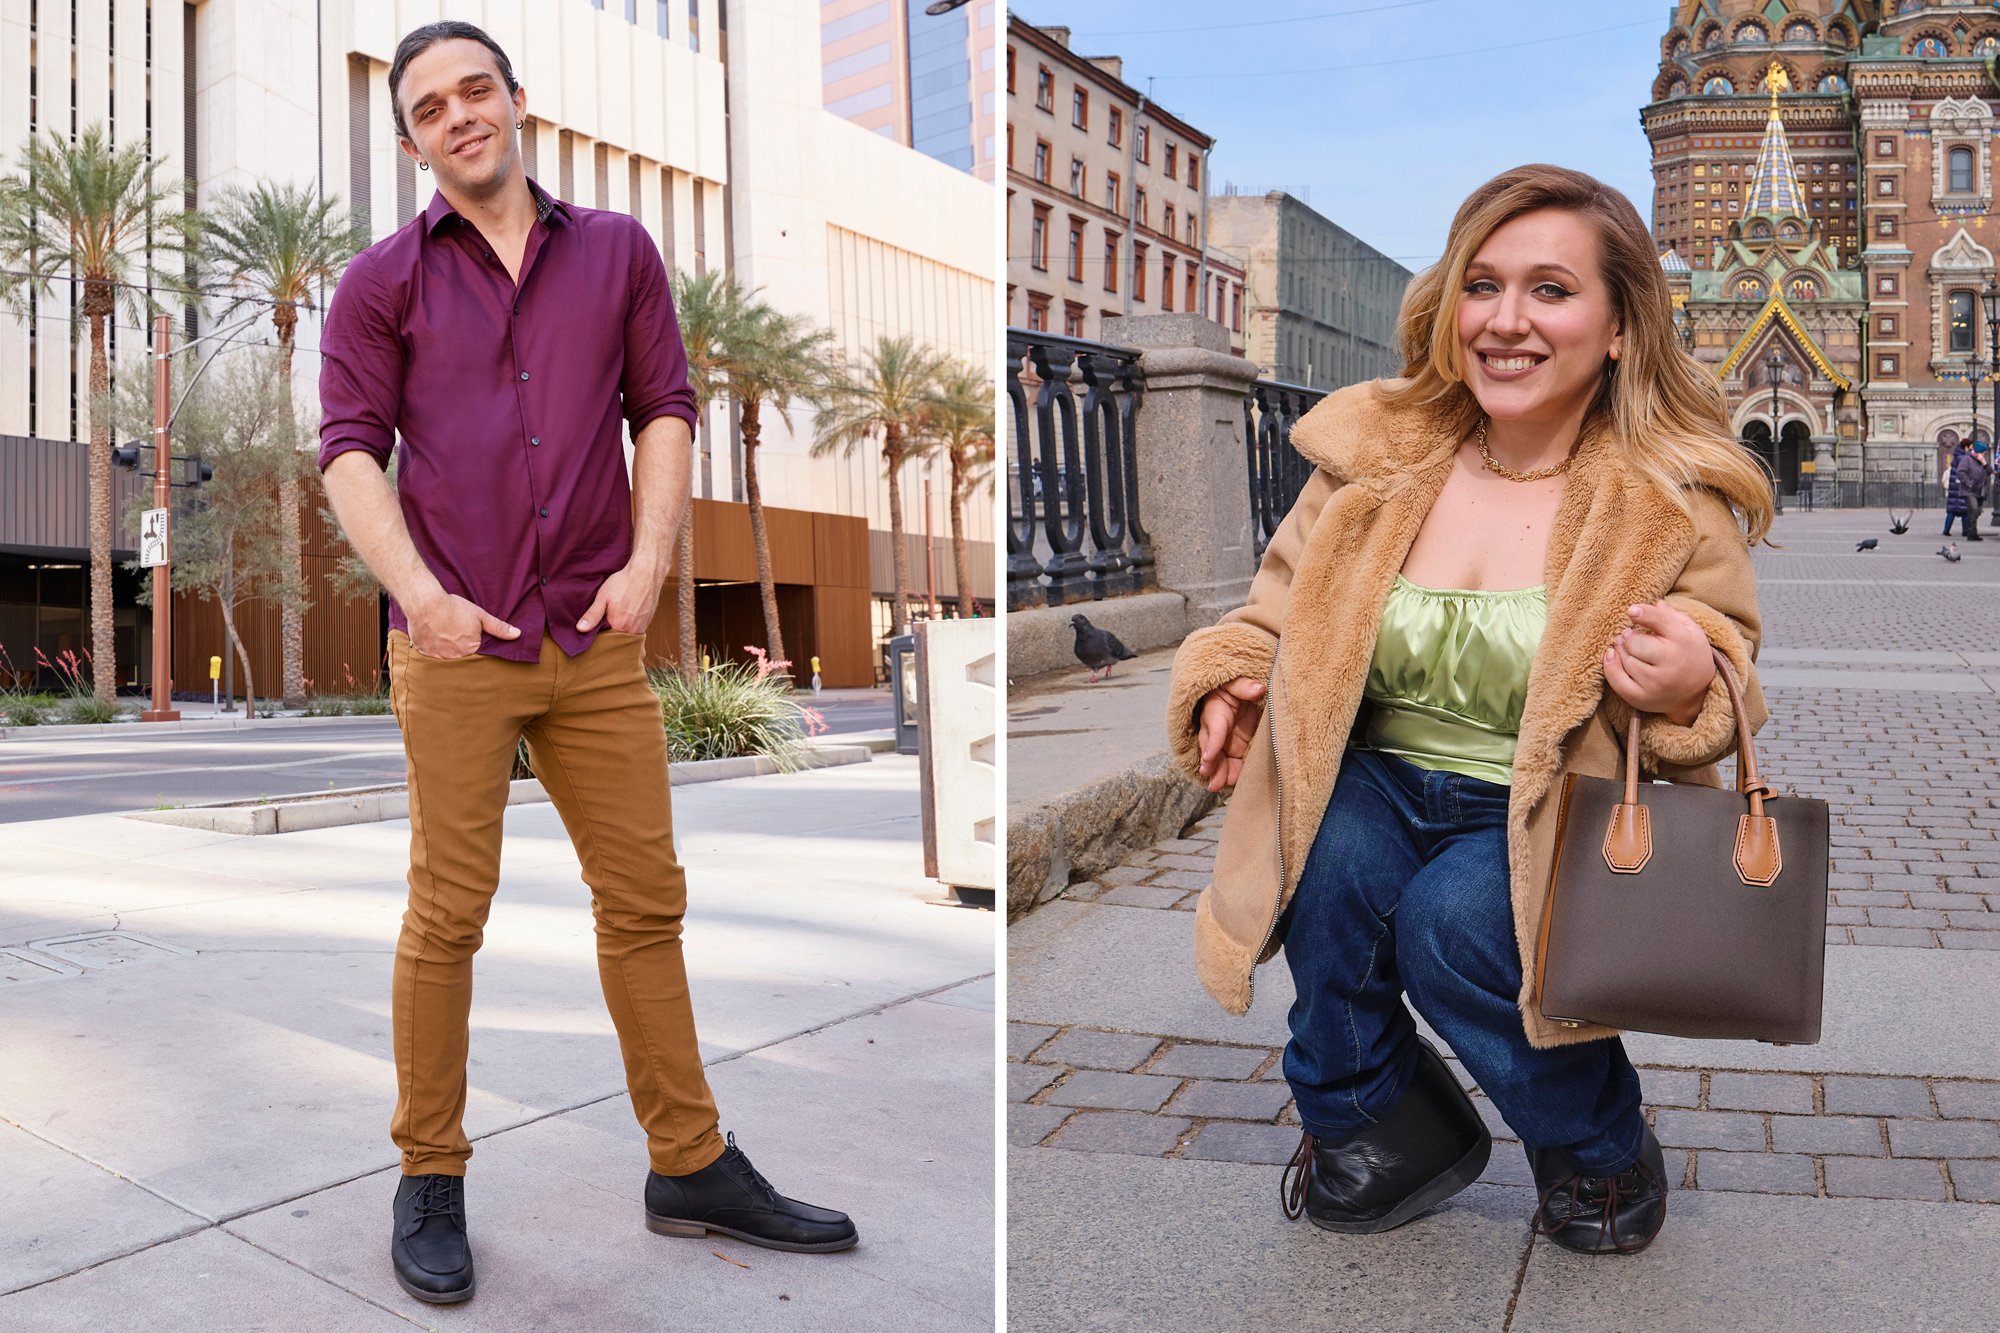 '90 Day Fiancé' star Caleb wearing a purple button down and brown pants and Alina wearing a green top, jeans, and a brown fur coat.